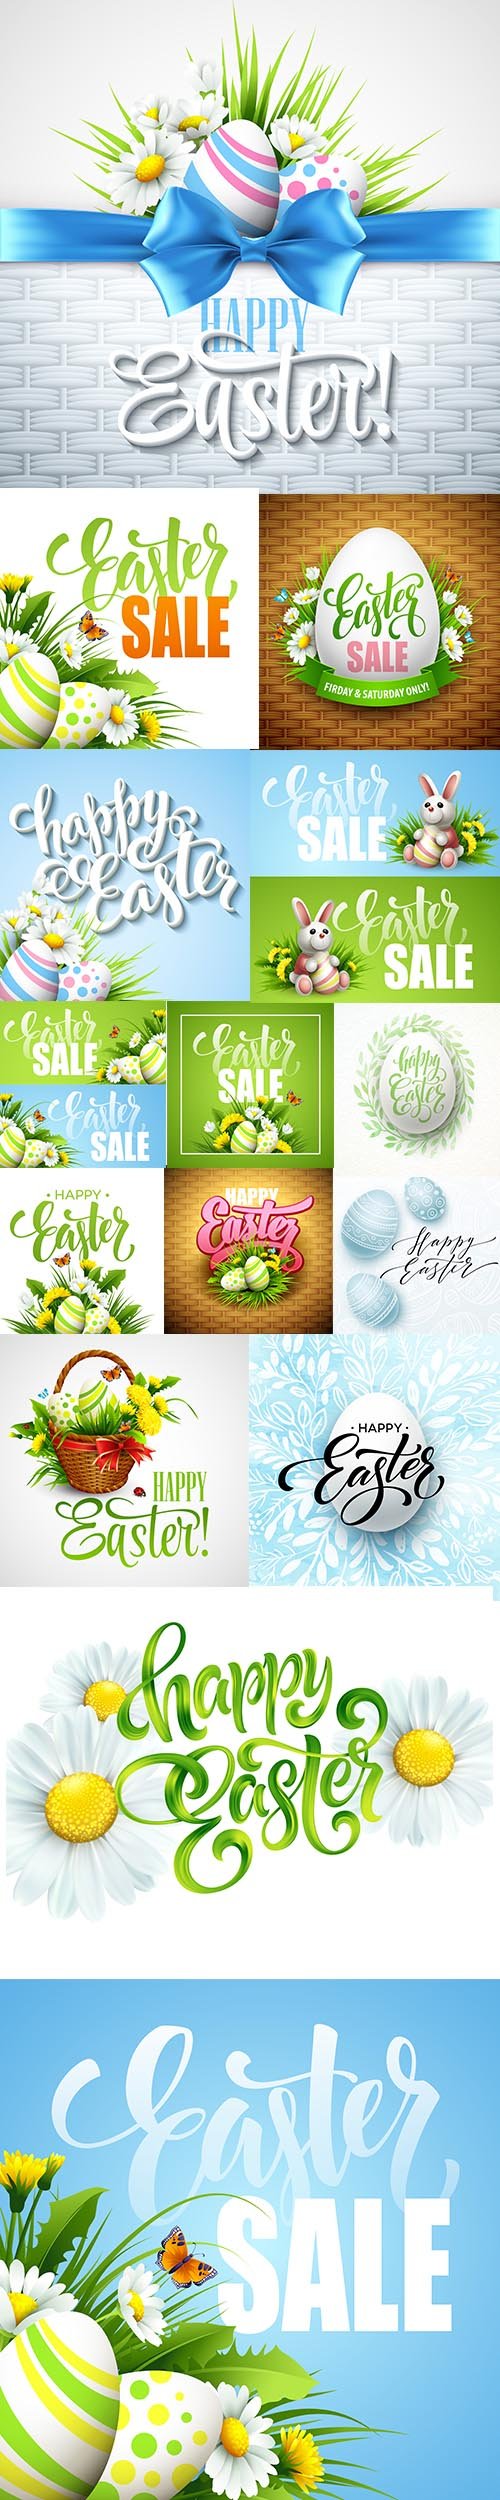 Easter Sale Banner with Eggs and Spring Flower Illustrations